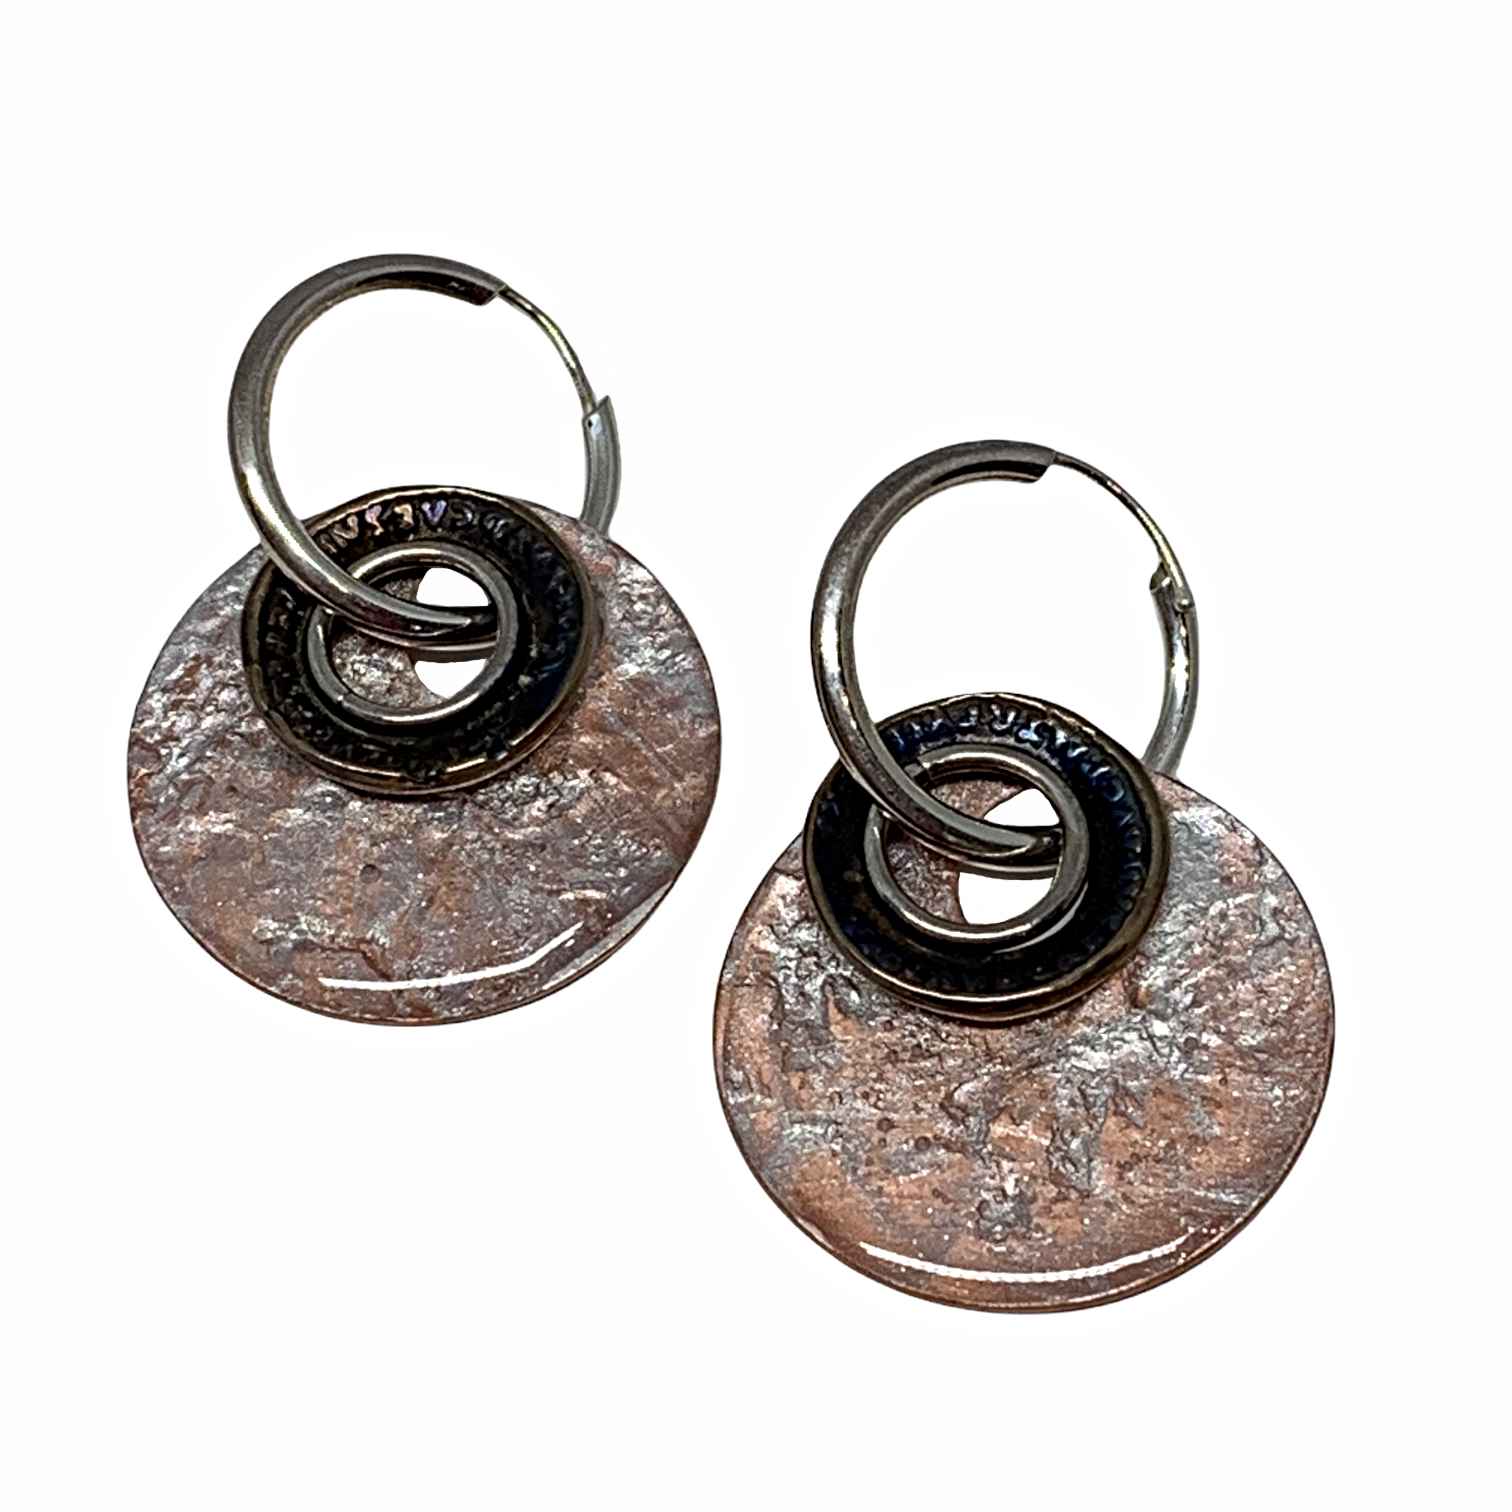 Handmade sterling silver, bronze, and pearlized copper earrings by Karyn Chopik | Effusion Art Gallery + Cast Glass Studio, Invermere BC